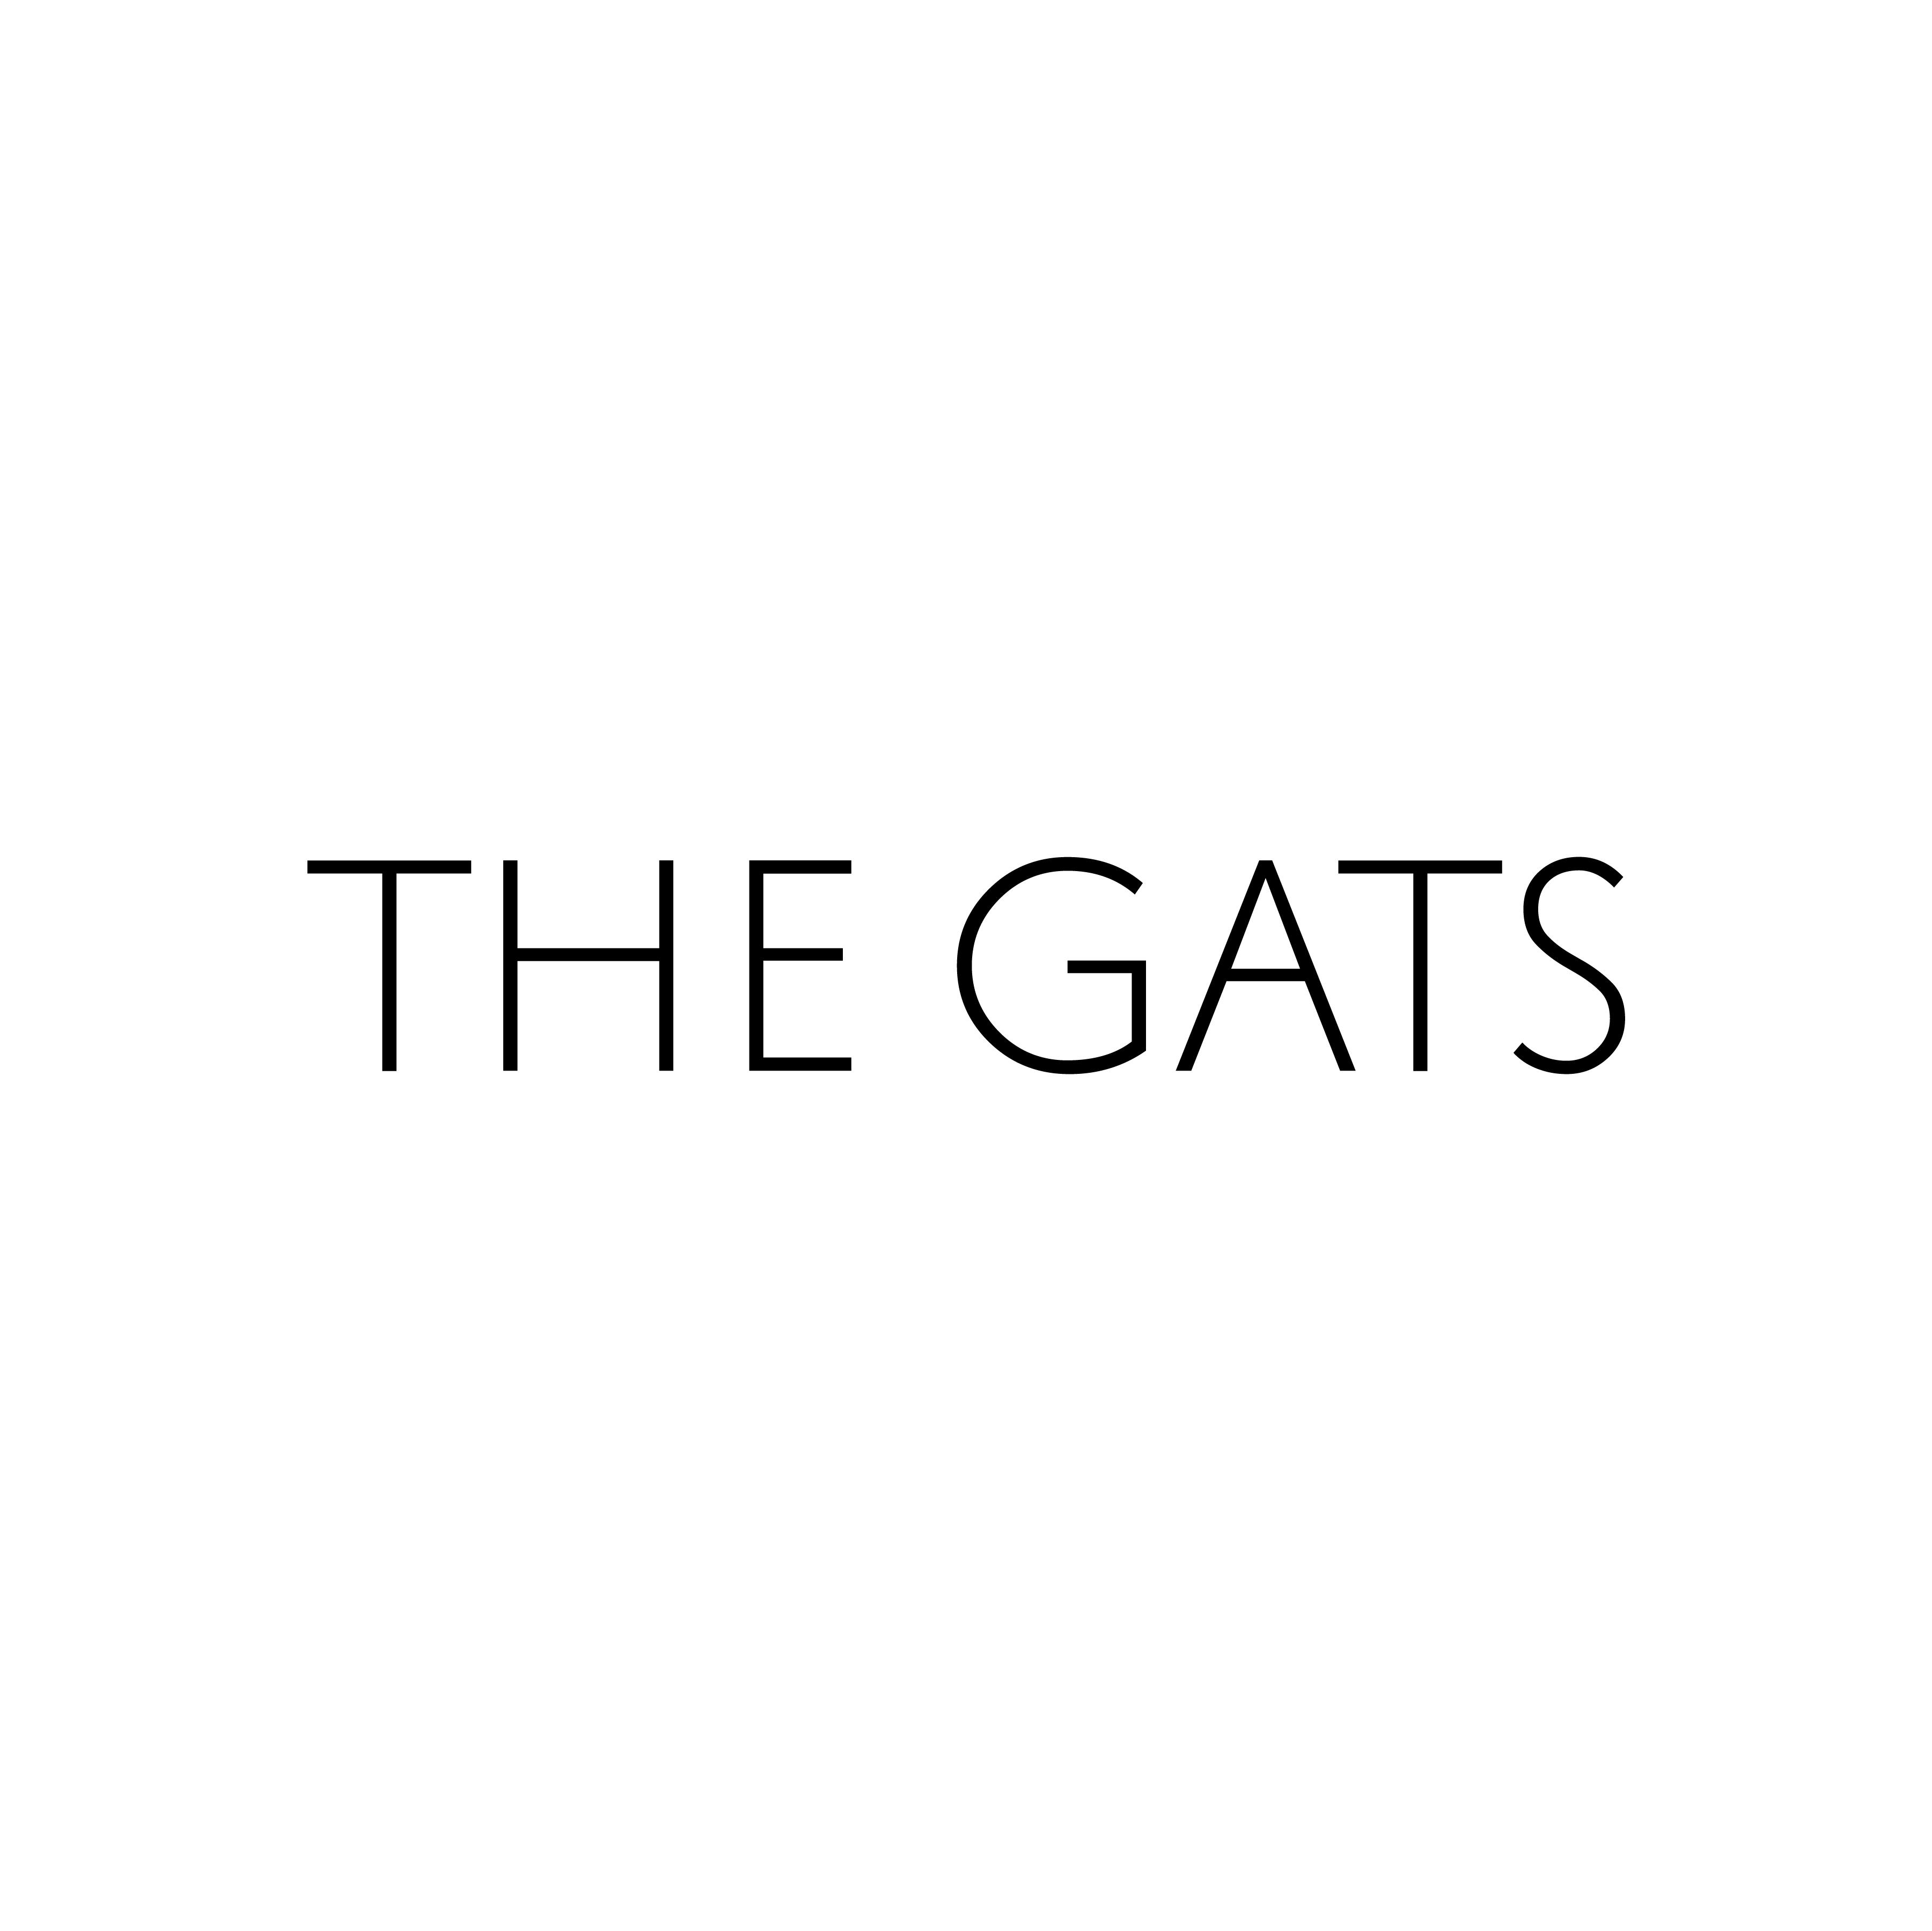 The Gats Investment